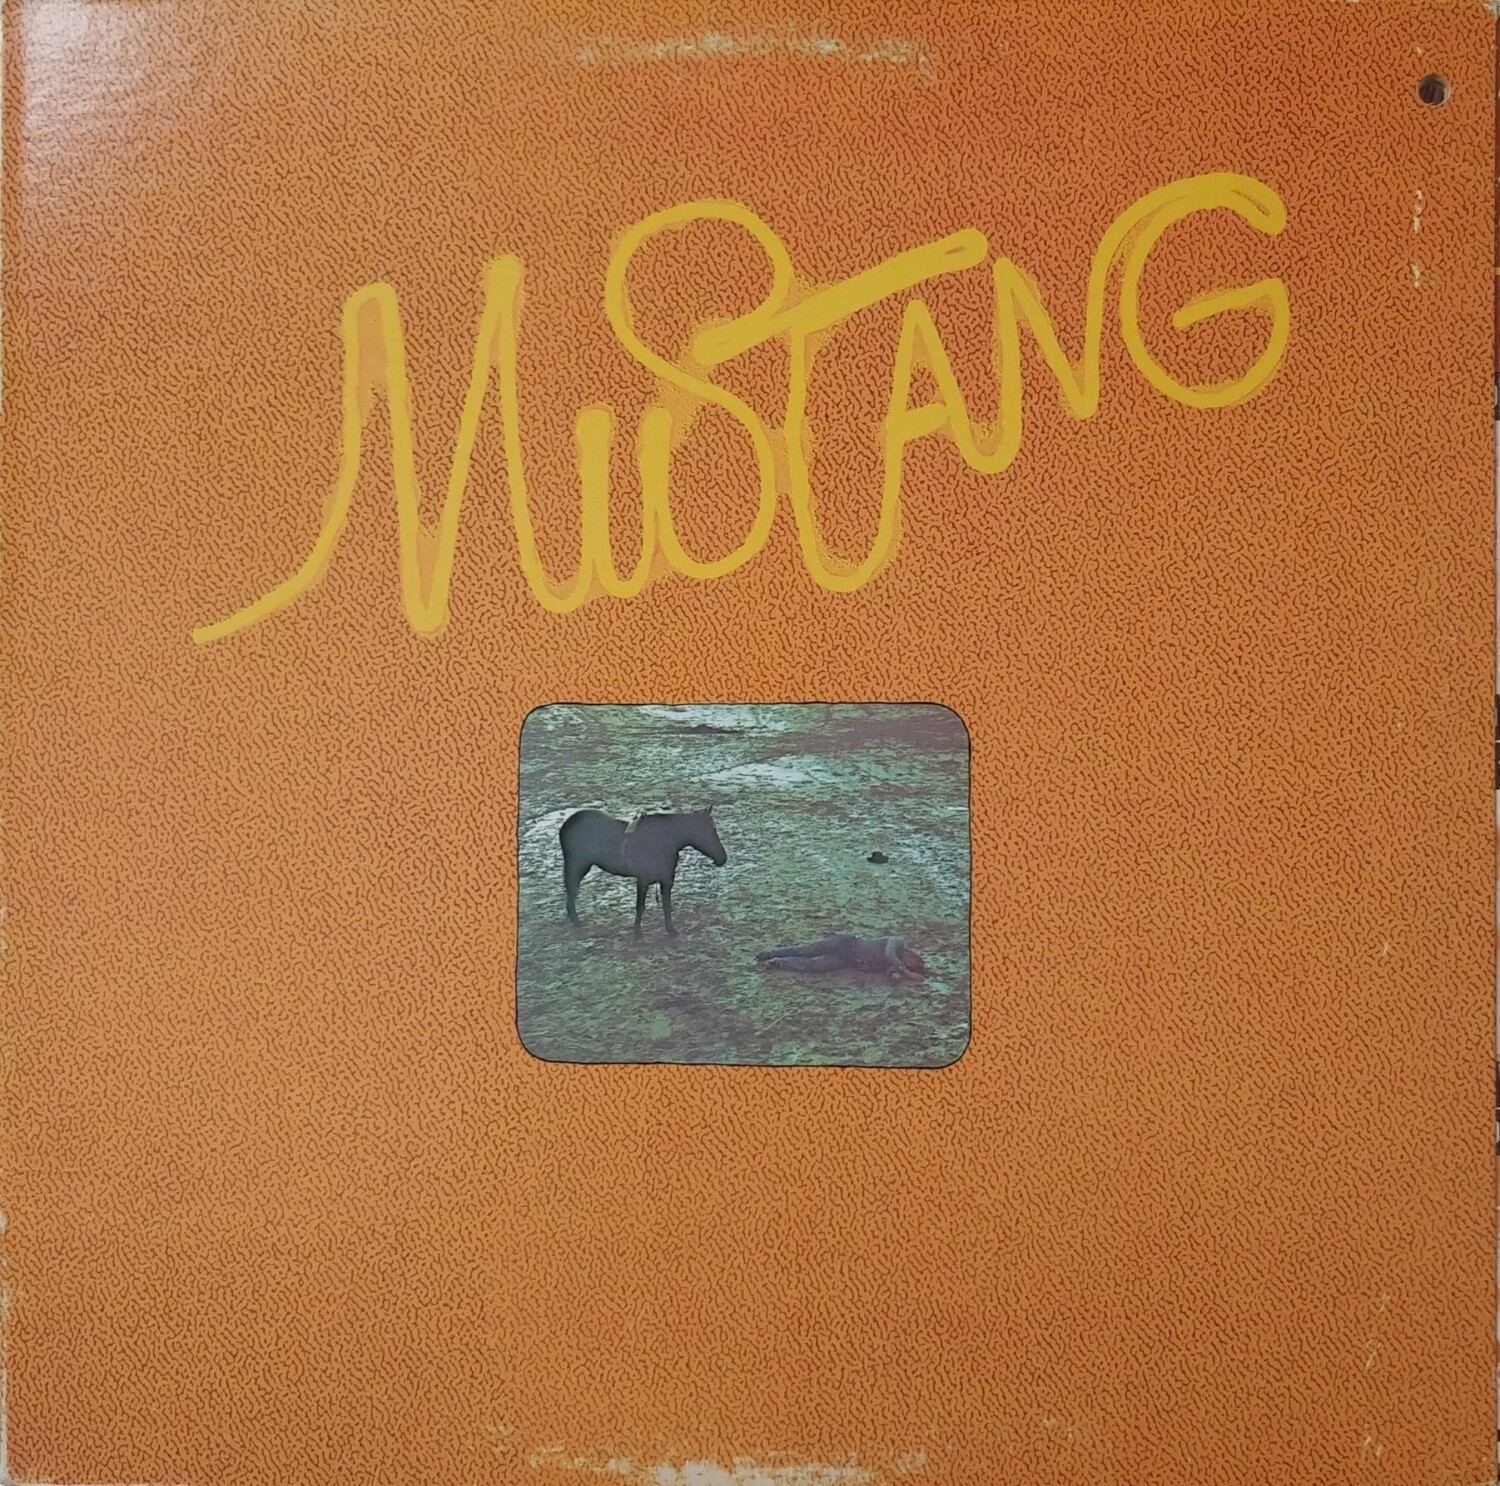 Yves Lapierre - Mustang Movie Soundtrack